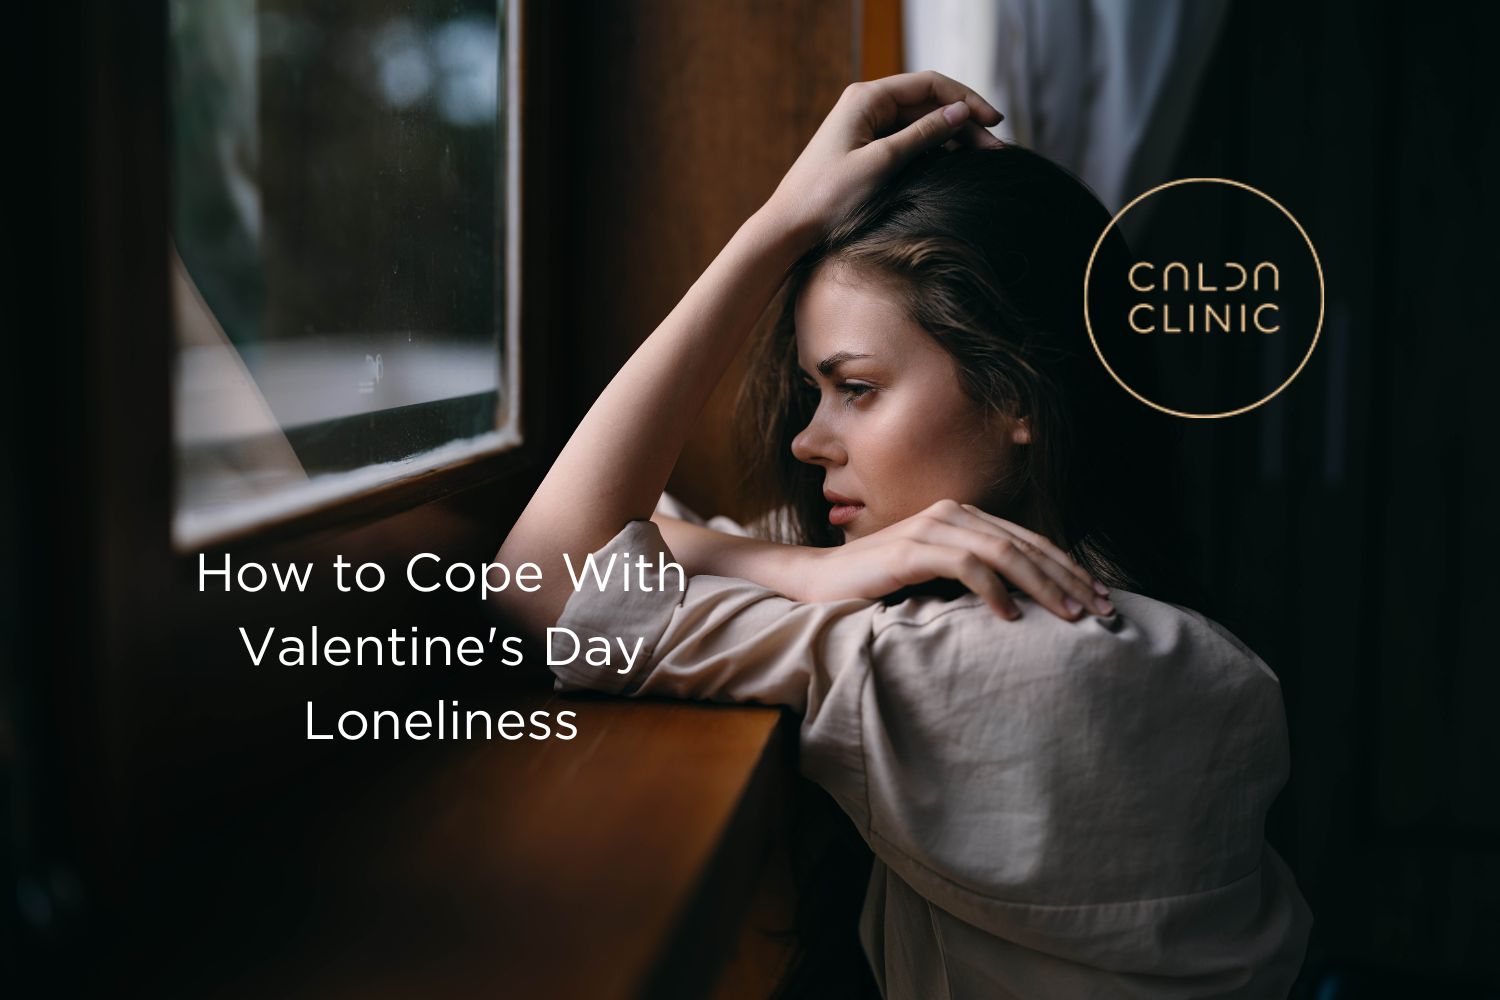 How to Cope With Valentine's Day Loneliness